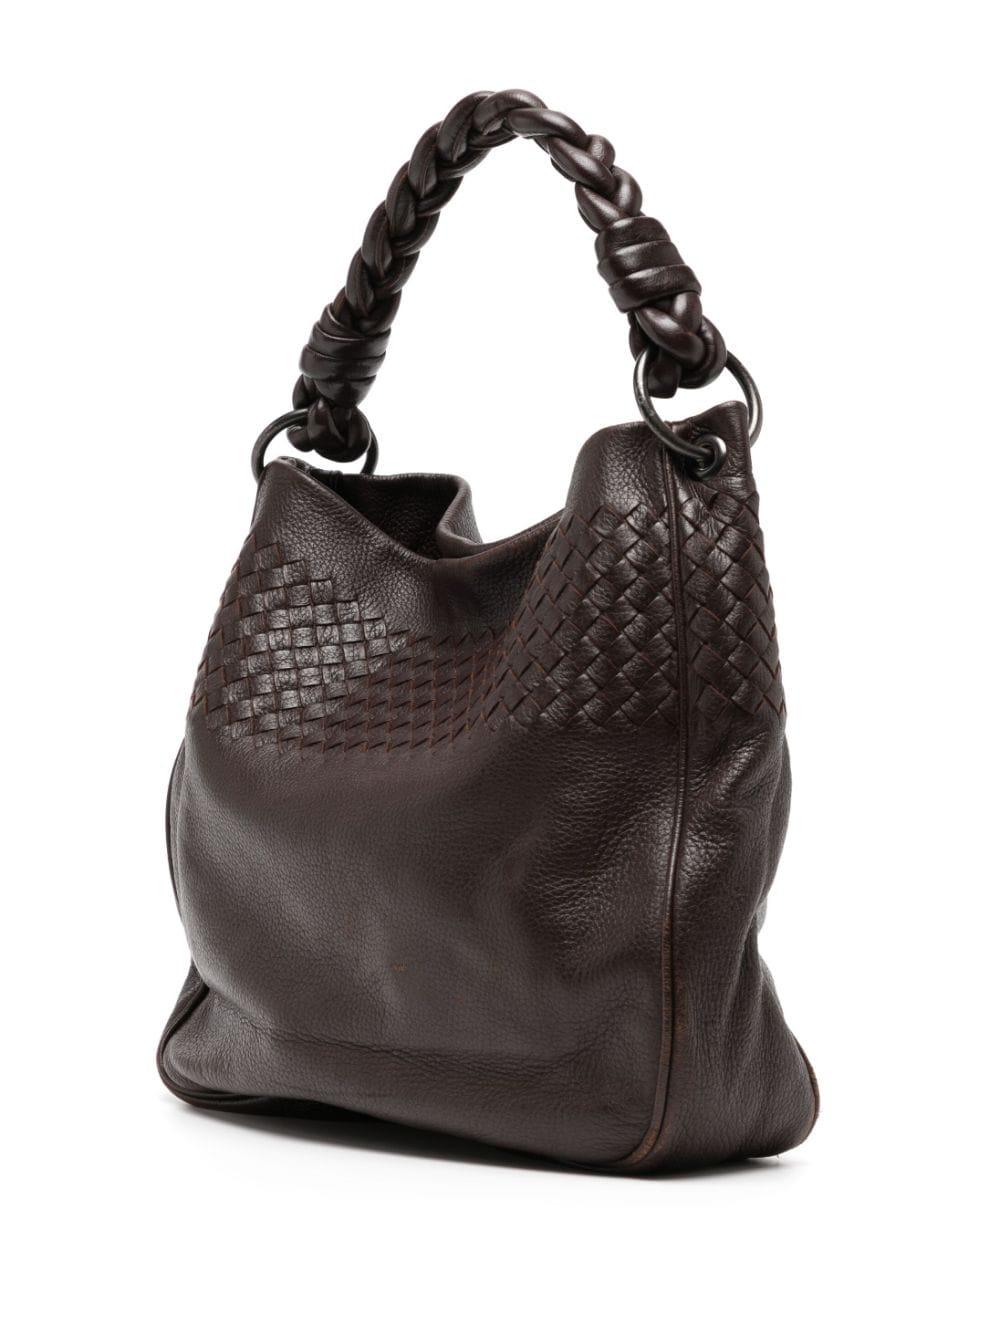 Expertly crafted in Italy, this Bottega Veneta Hobo Bag in coffee brown is made of 100% leather in the signature intrecciato technique. Featuring a single braided top handle, concealed magnetic fastening and silver-tone hardware.  This bag is in